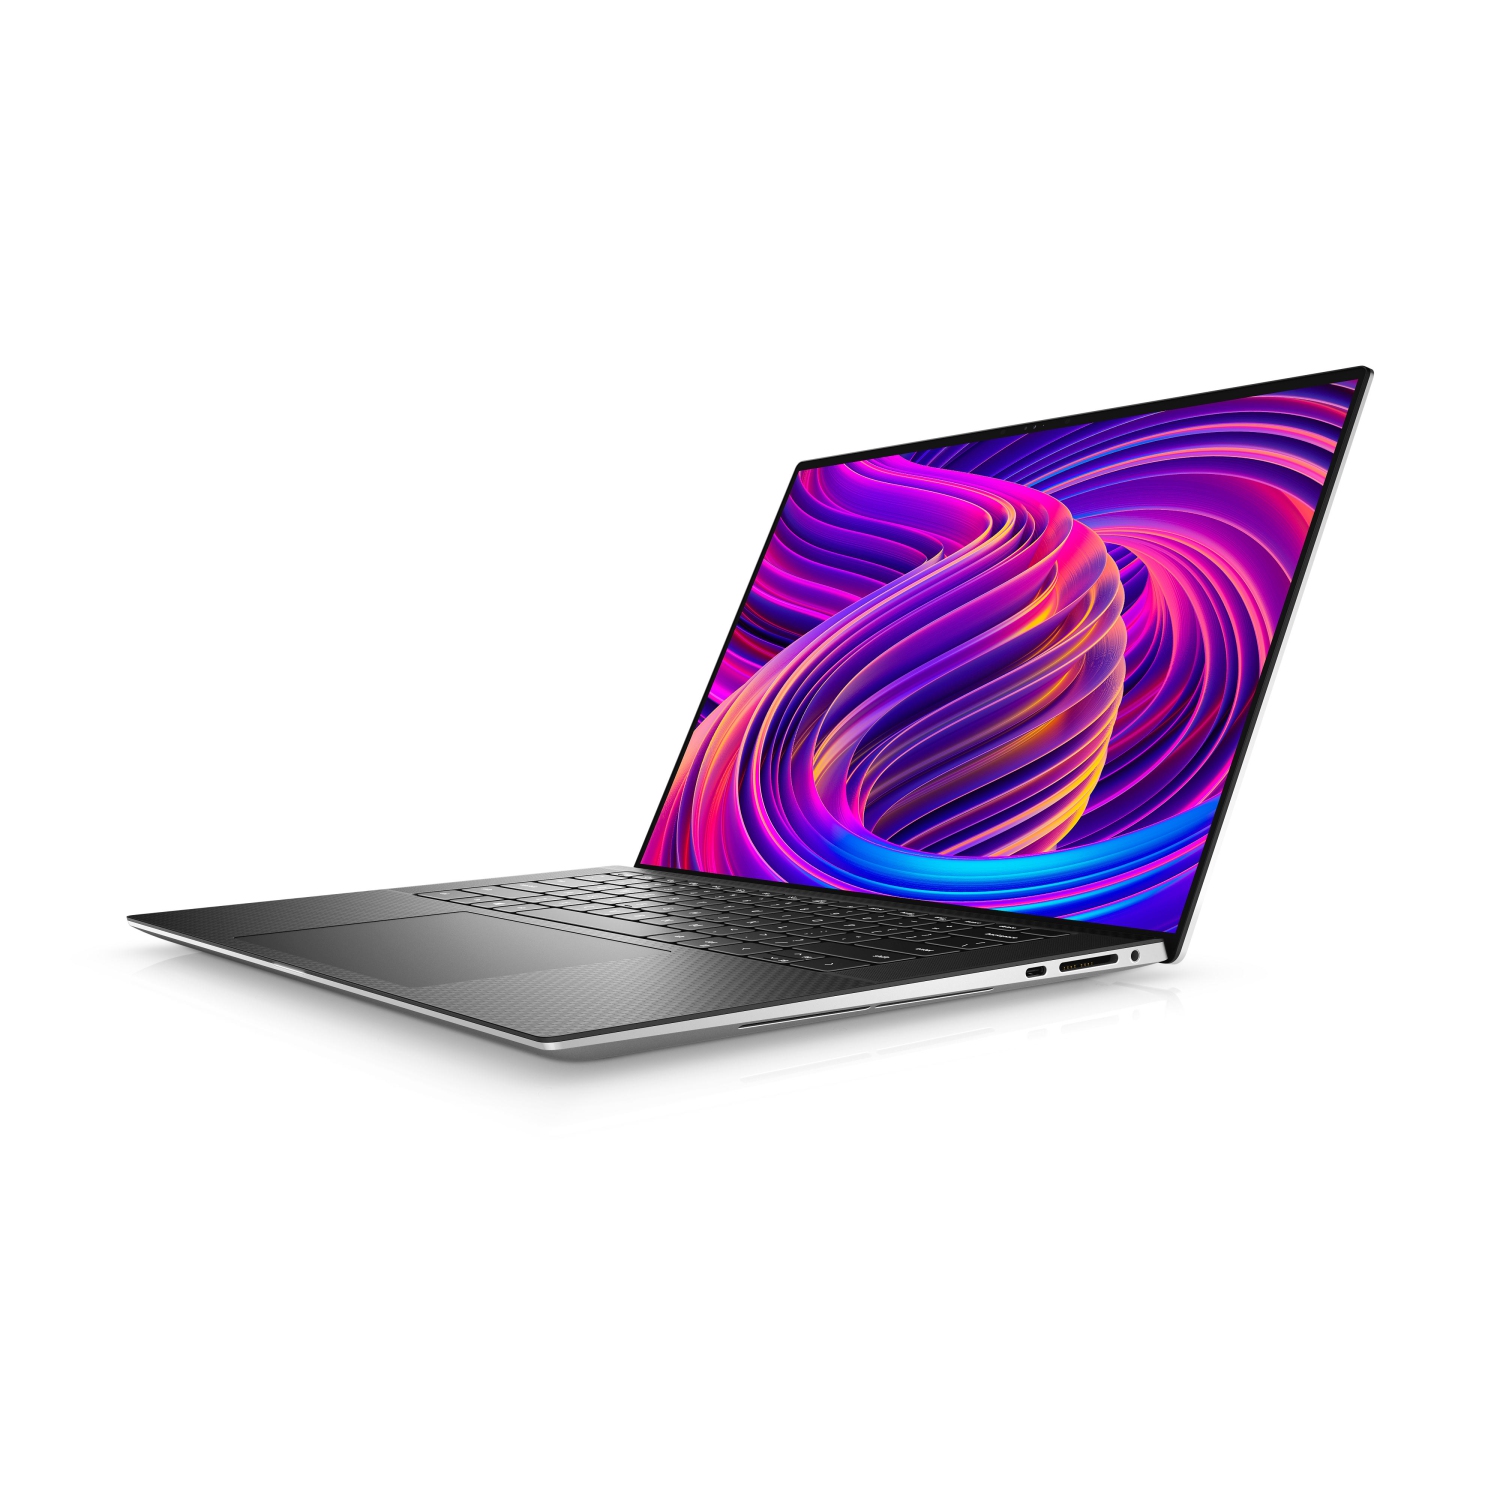 Refurbished (Excellent) - Dell XPS 15 9510 Laptop (2021), 15.6" 4K Touch, Core i9, 4TB SSD + 4TB SSD, 64GB RAM, 3050 Ti, 8 Cores @ 4.9 GHz, 11th Gen CPU Certified